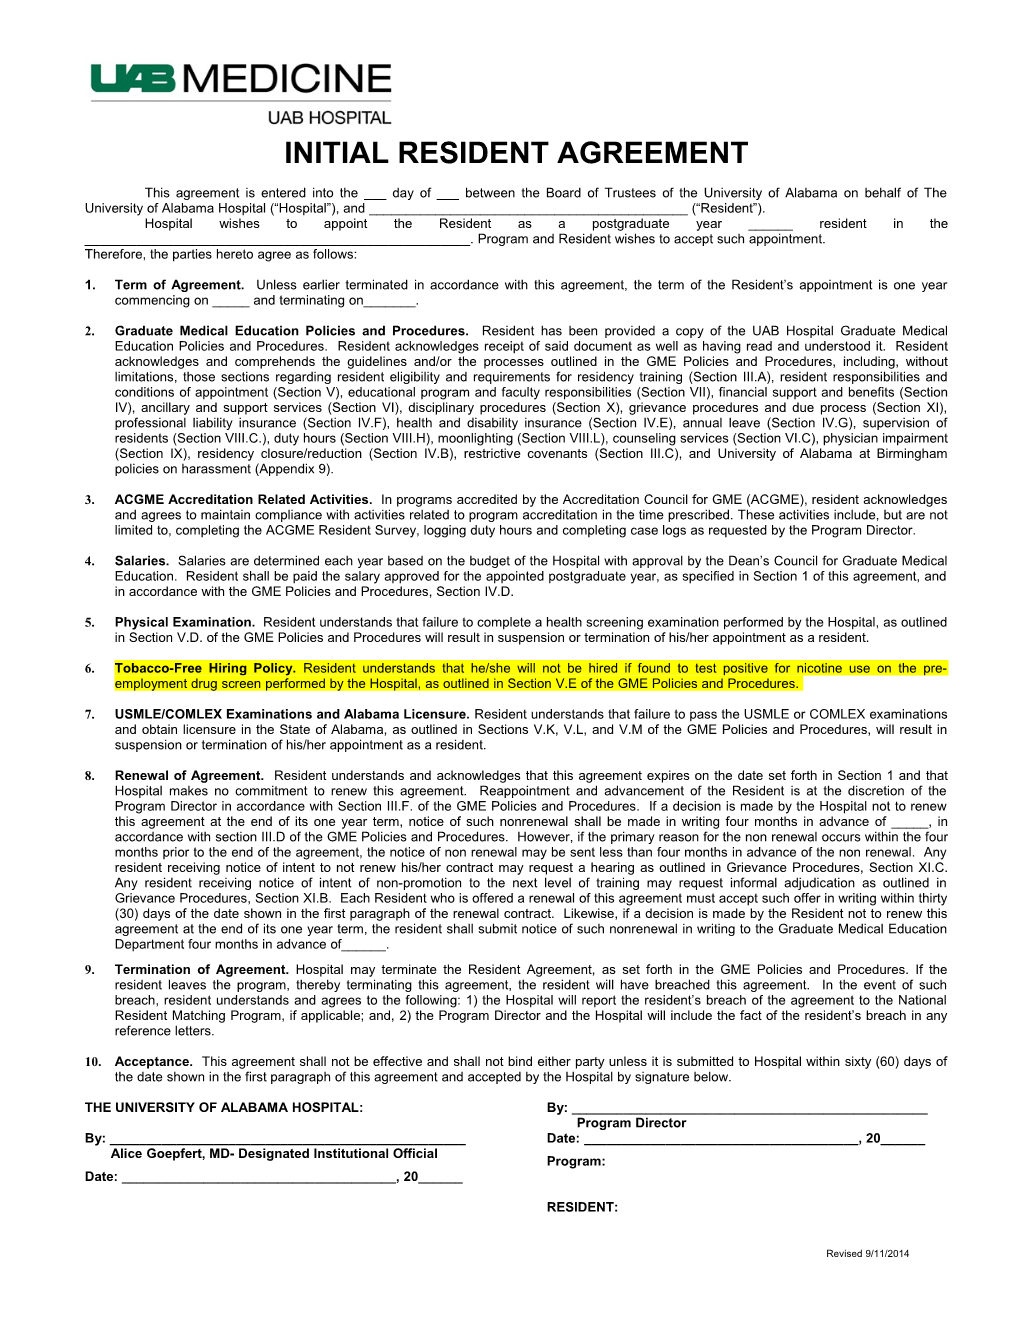 Initial Resident Agreement